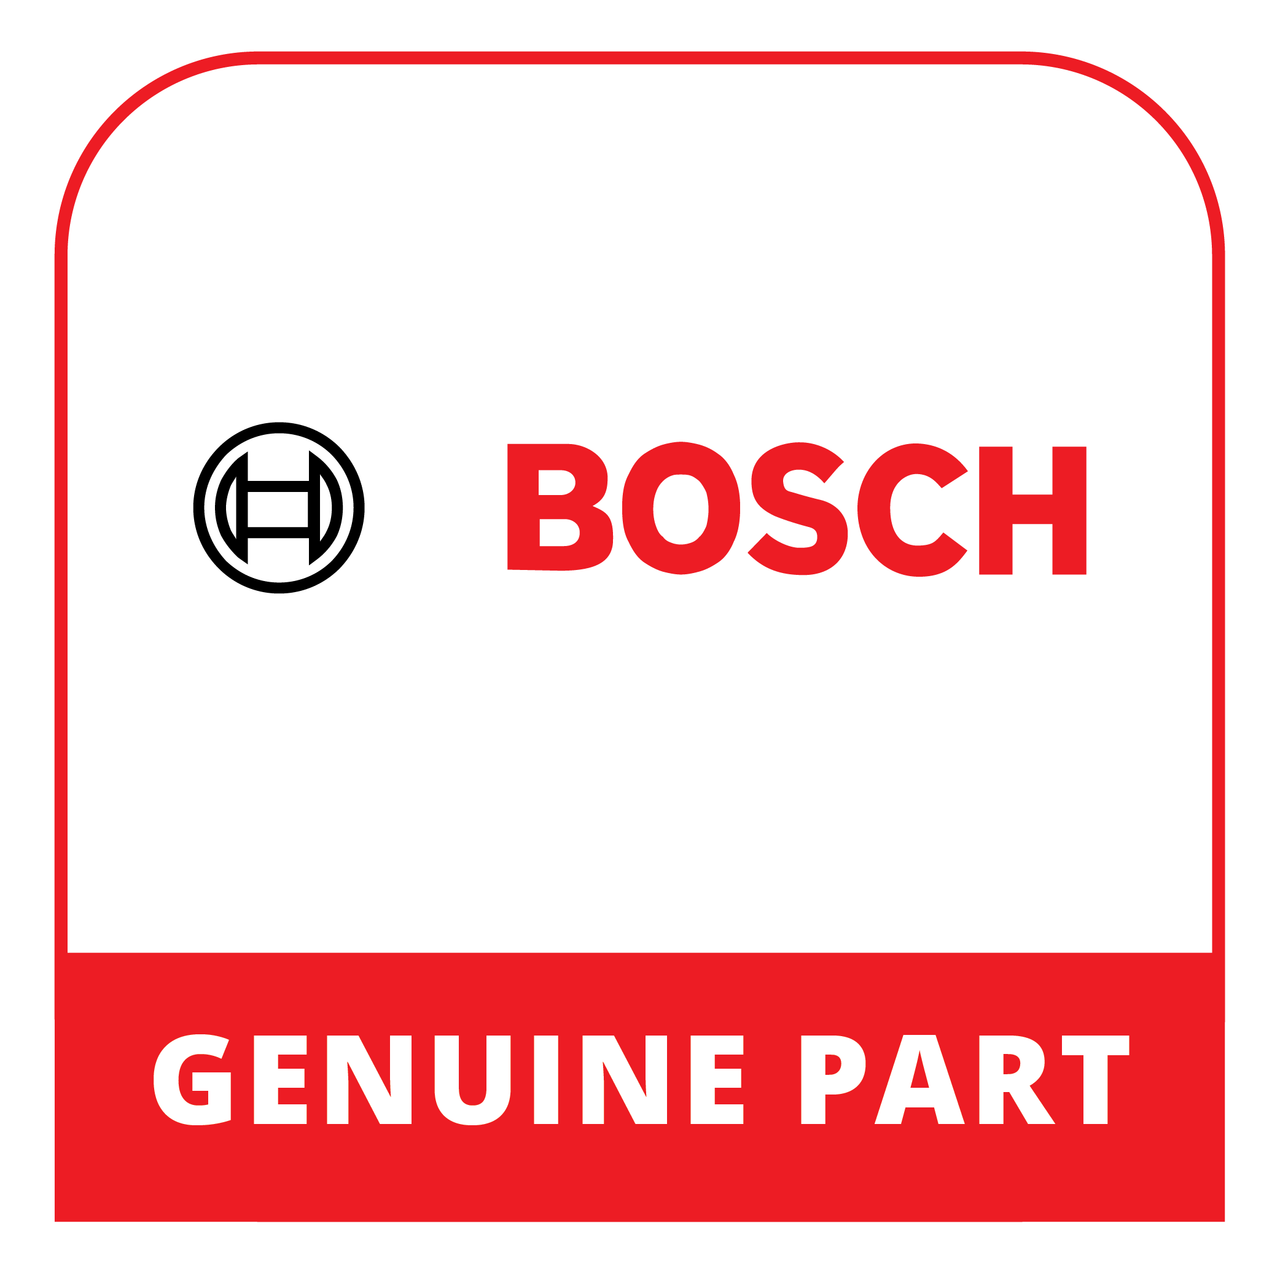 Bosch (Thermador) 20000802 - Frame - Genuine Bosch (Thermador) Part